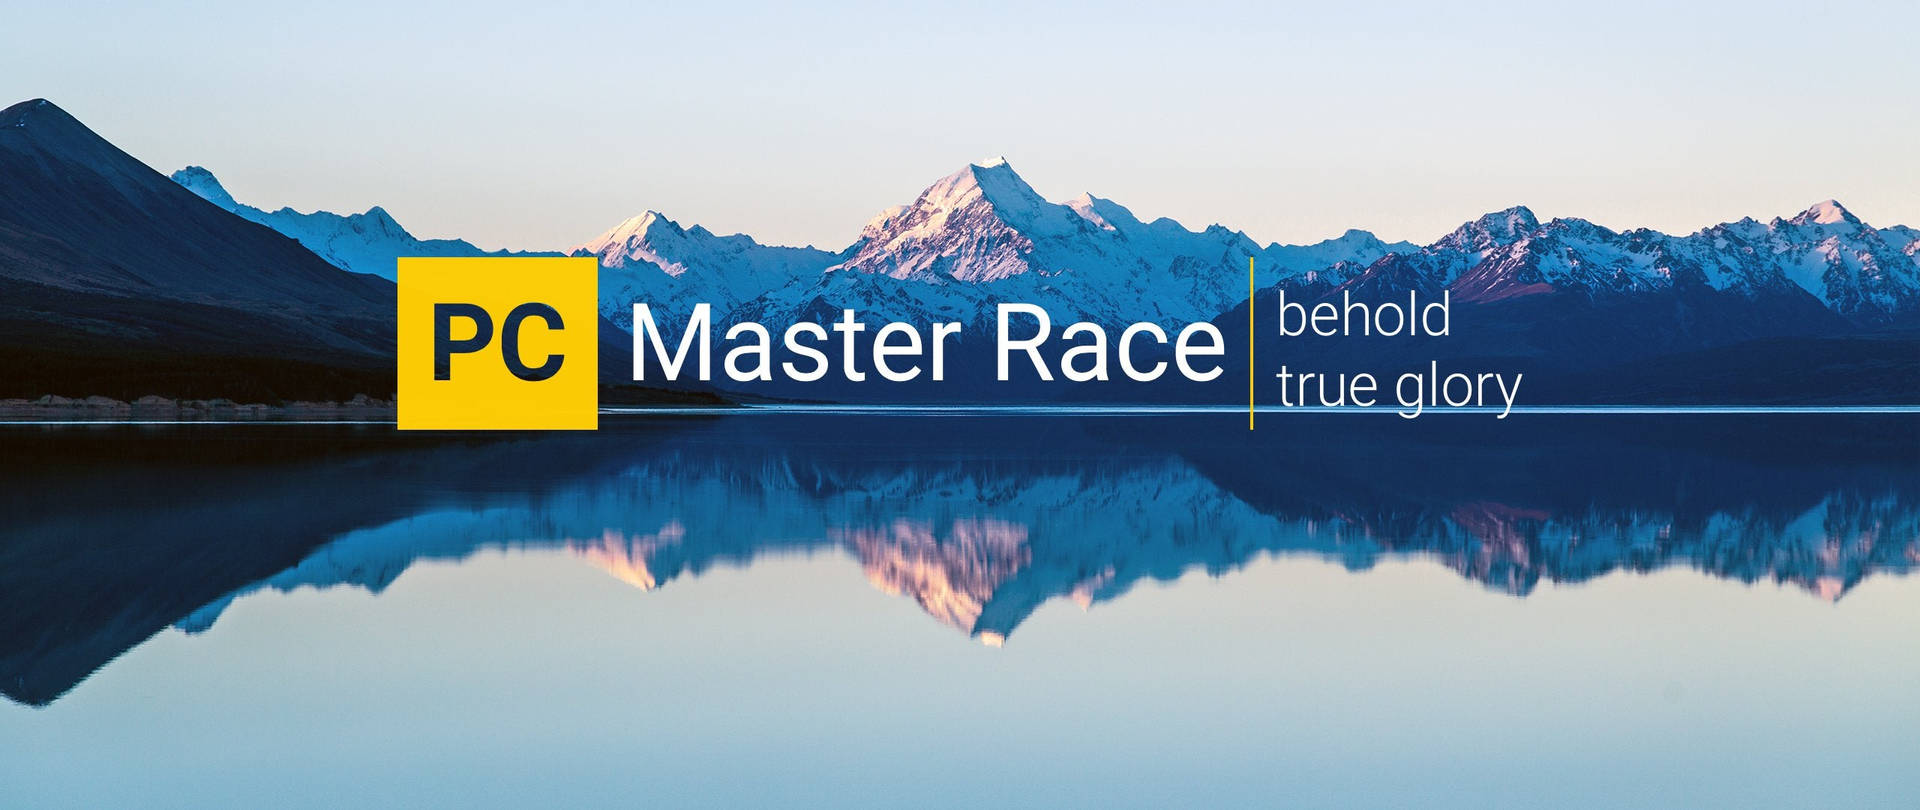 Pc Master Race Lake And Mountain Picture